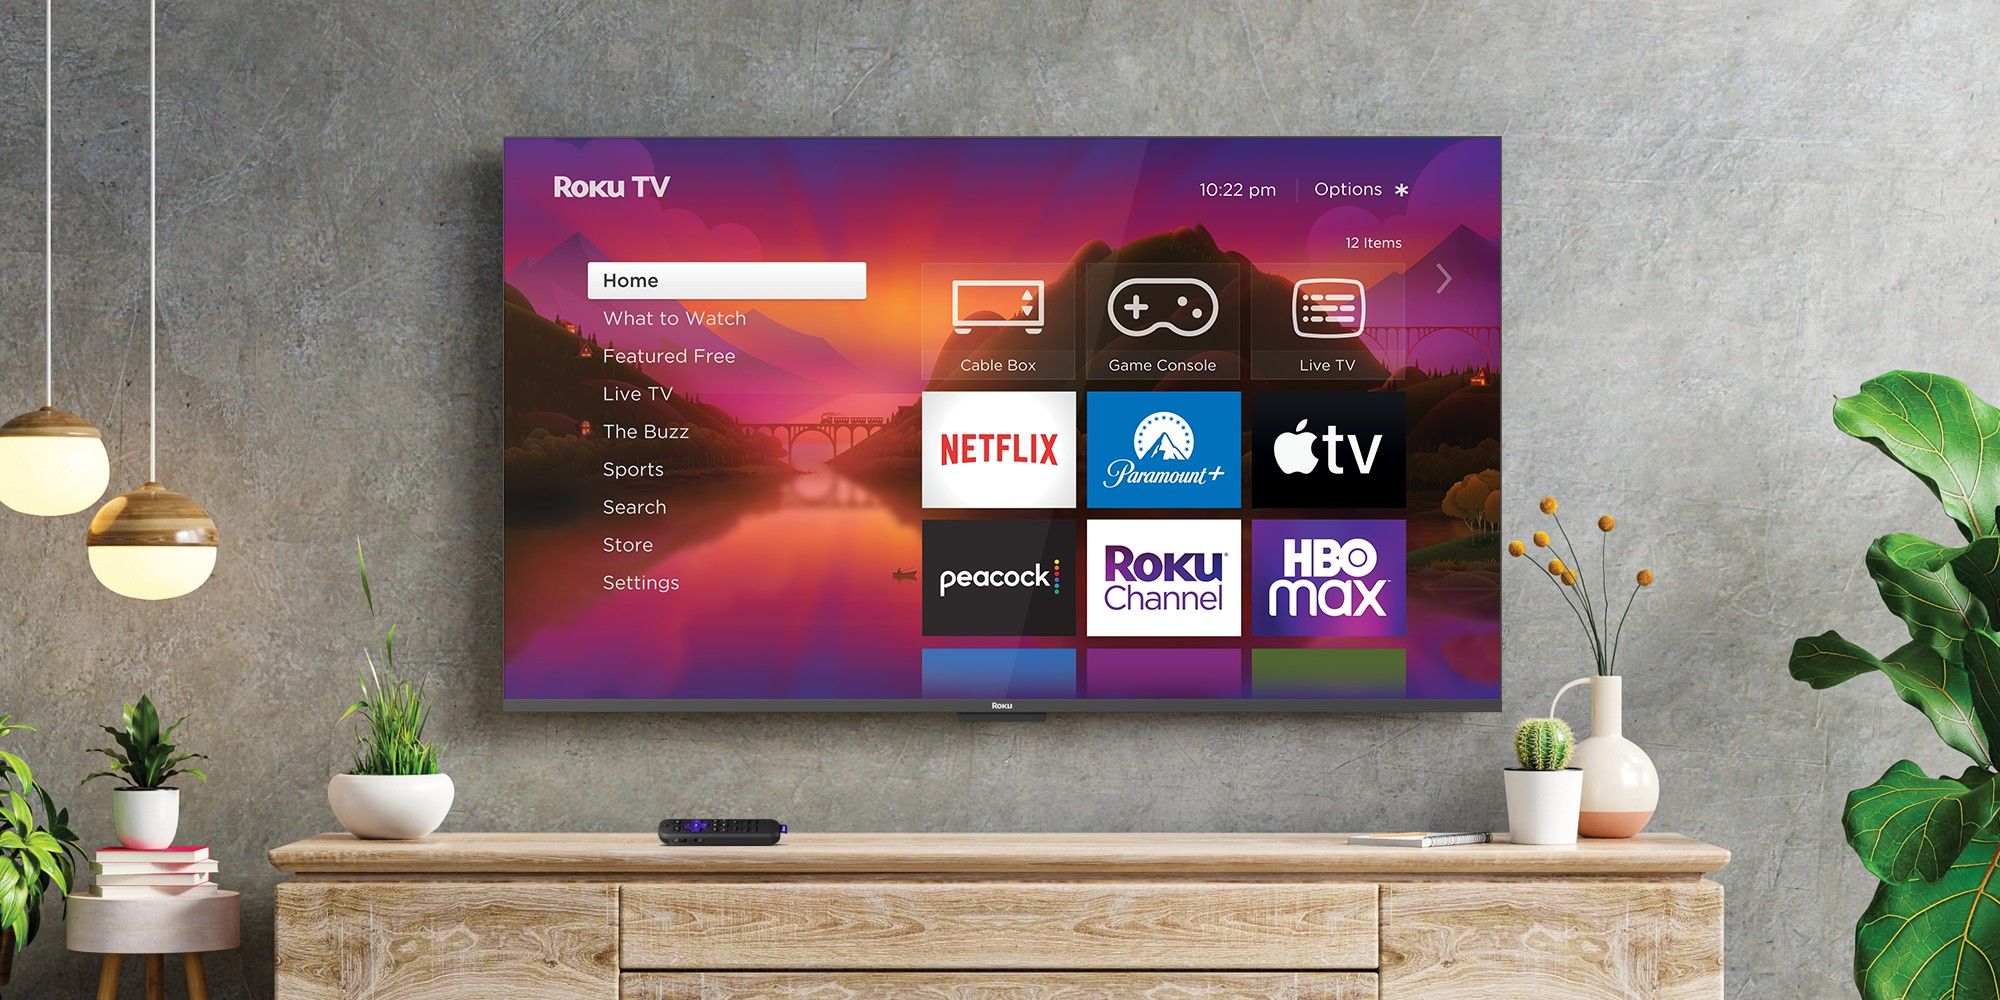 A Roku Smart TV hung on a wall in a living room